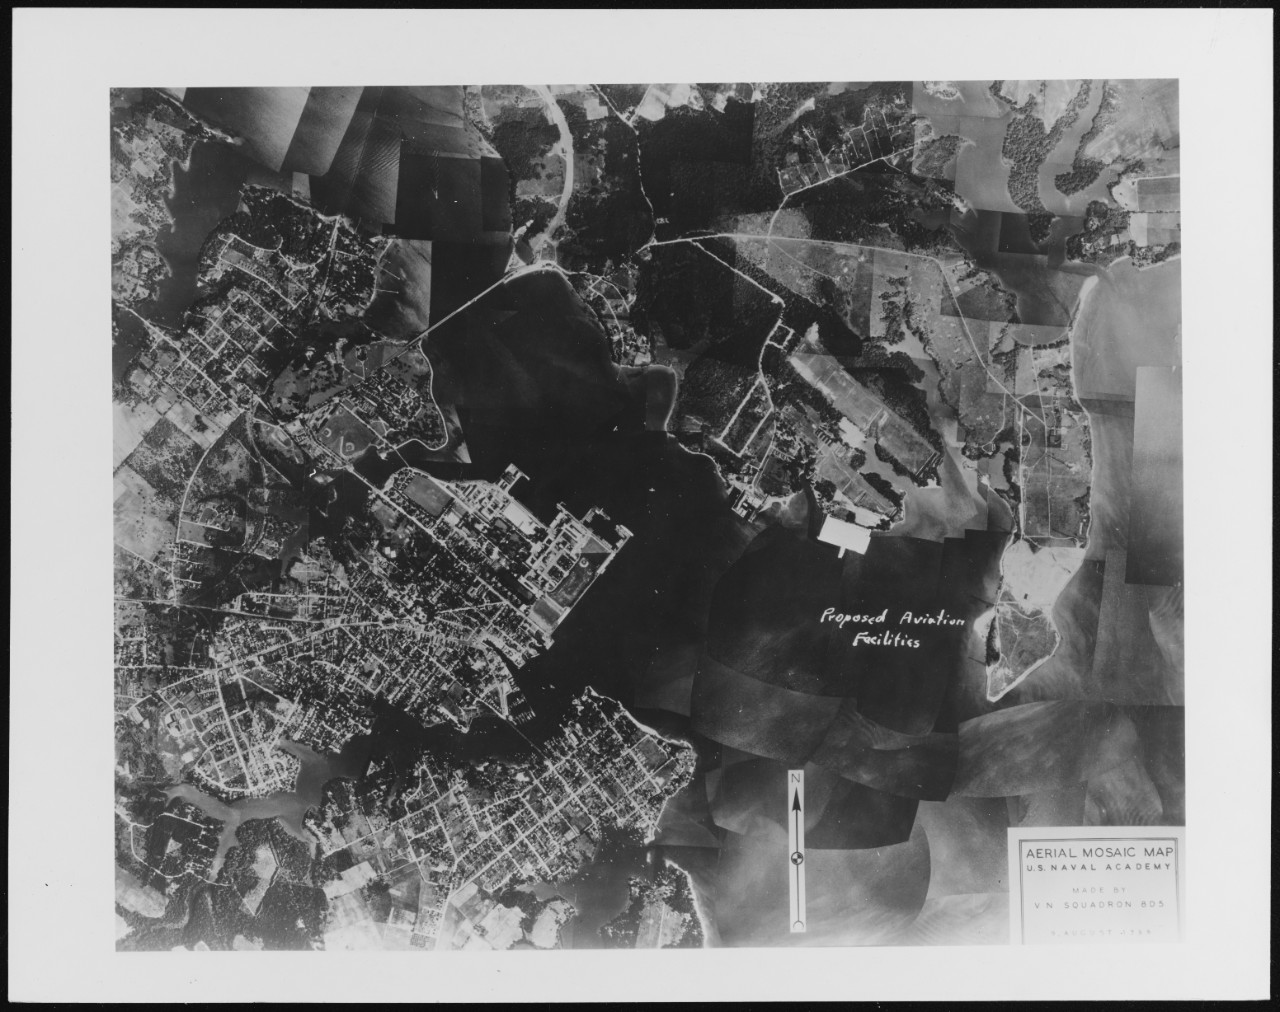 Area for proposed Air Station at U.S. Naval Academy. Anacostia, Washington, D.C. August 9, 1938